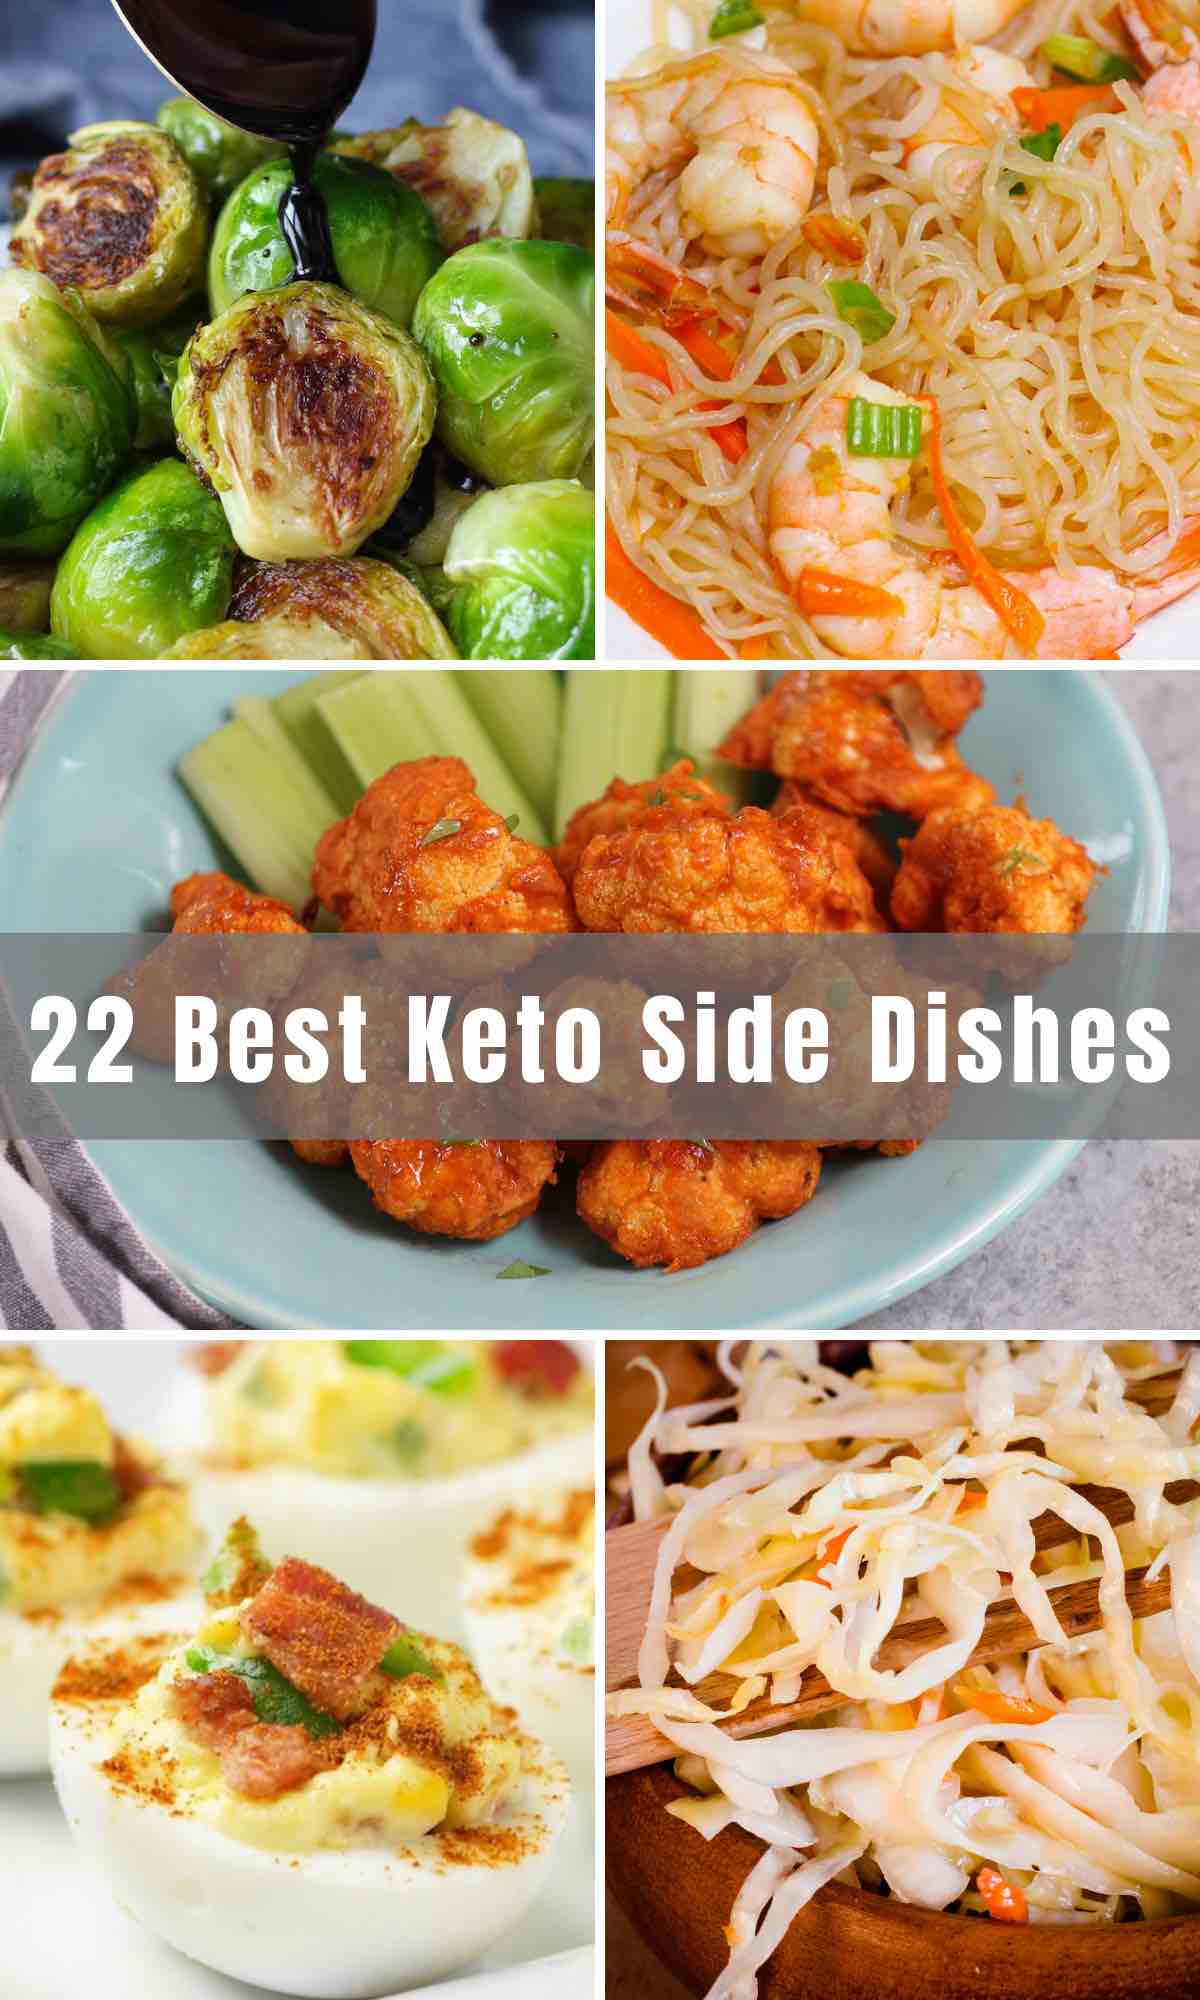 Are you contemplating the keto diet? Think it's impossible to do or to enjoy? Well, think again! We've got 22 of the Best Keto Side Dishes to get you started! You won't have to give up comfort, flavor, or your love for food with any of these keto-friendly recipes!